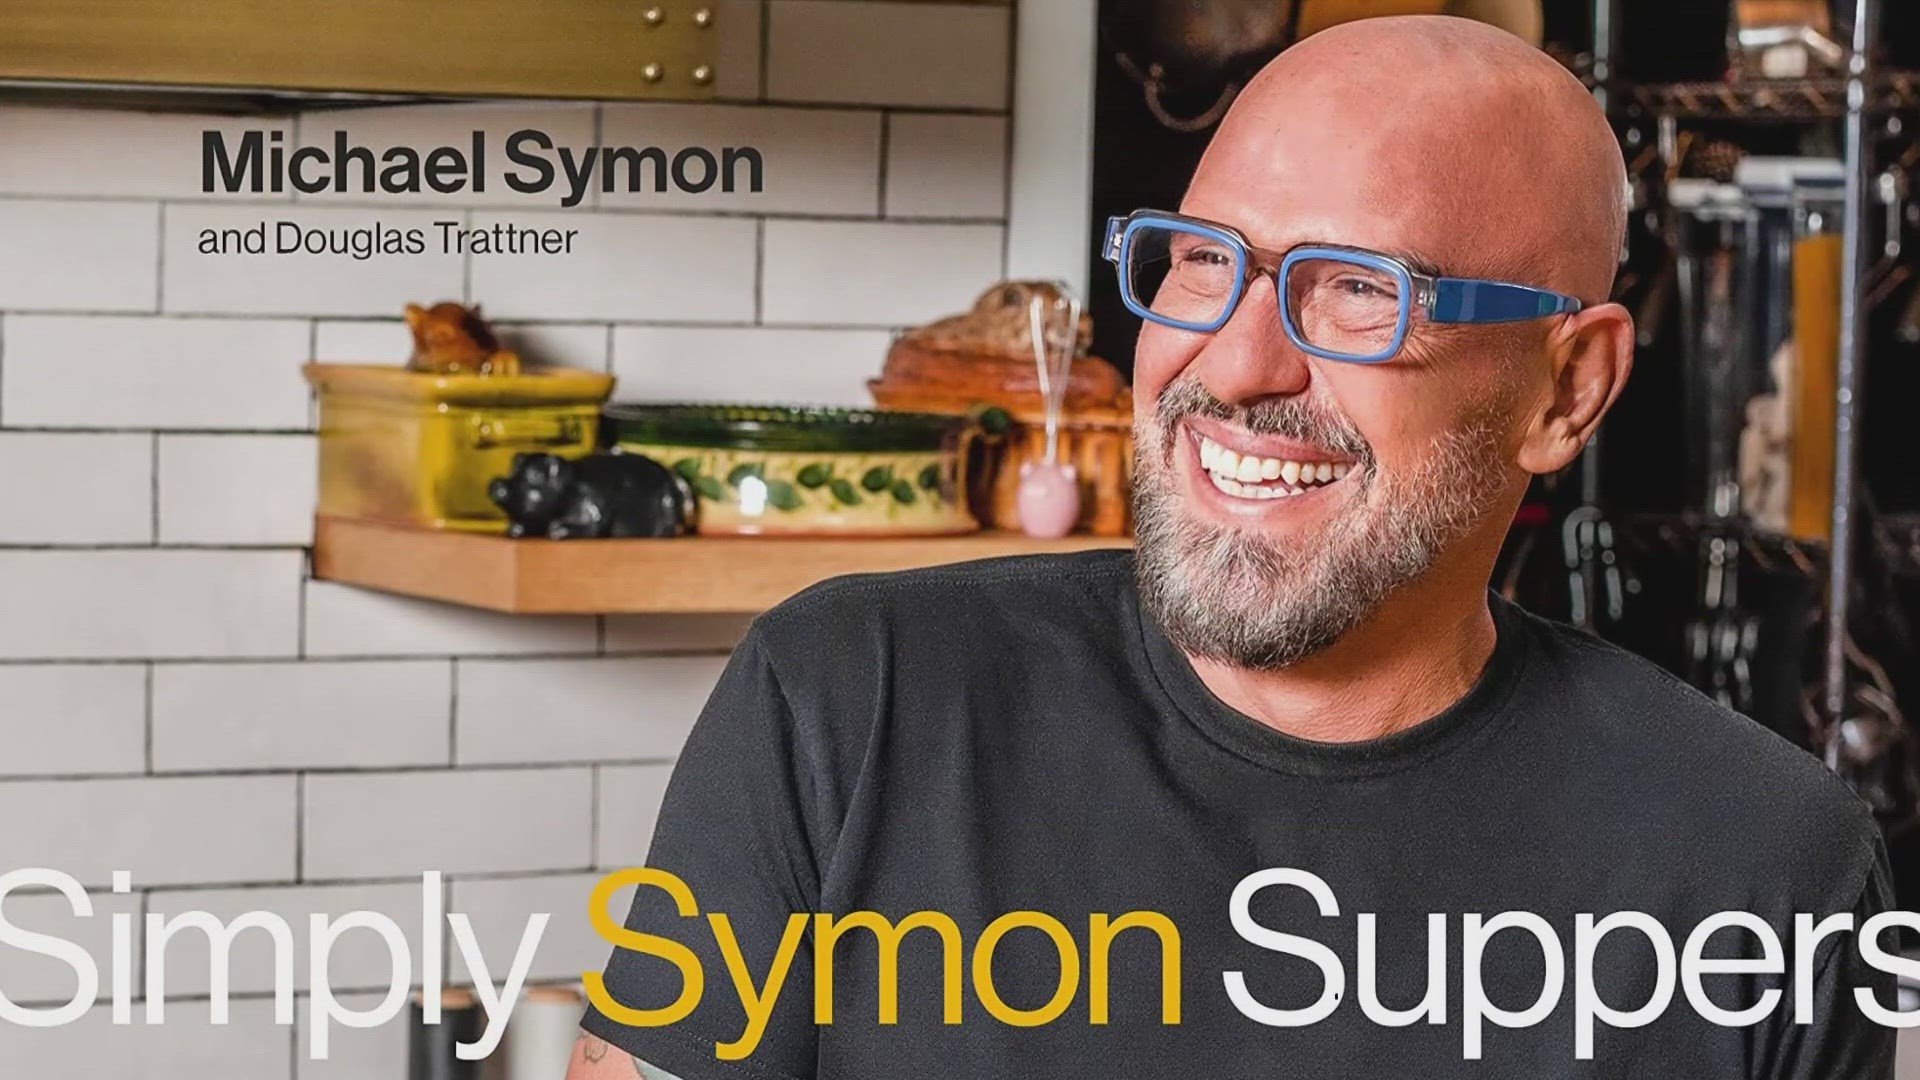 Symon's newest book, 'Simply Symon Suppers: Recipes and Menus for Every Week of the Year,' is co-authored by 3News contributor Doug Trattner.